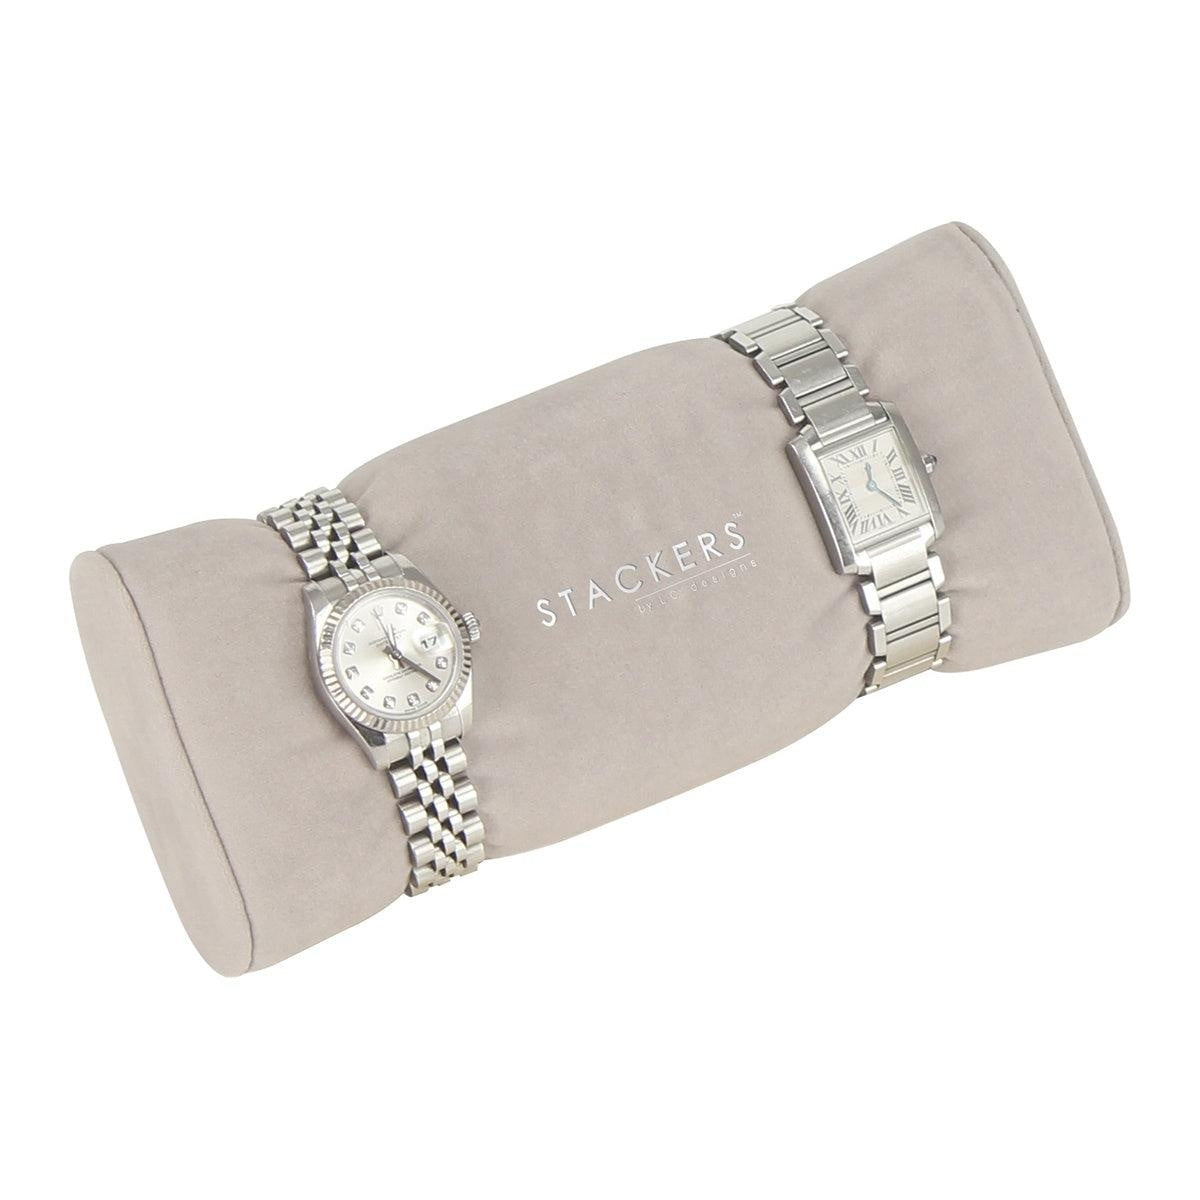 Stackers Accessories Watch - Bracelet Pillow Premium Mink - White Stackers